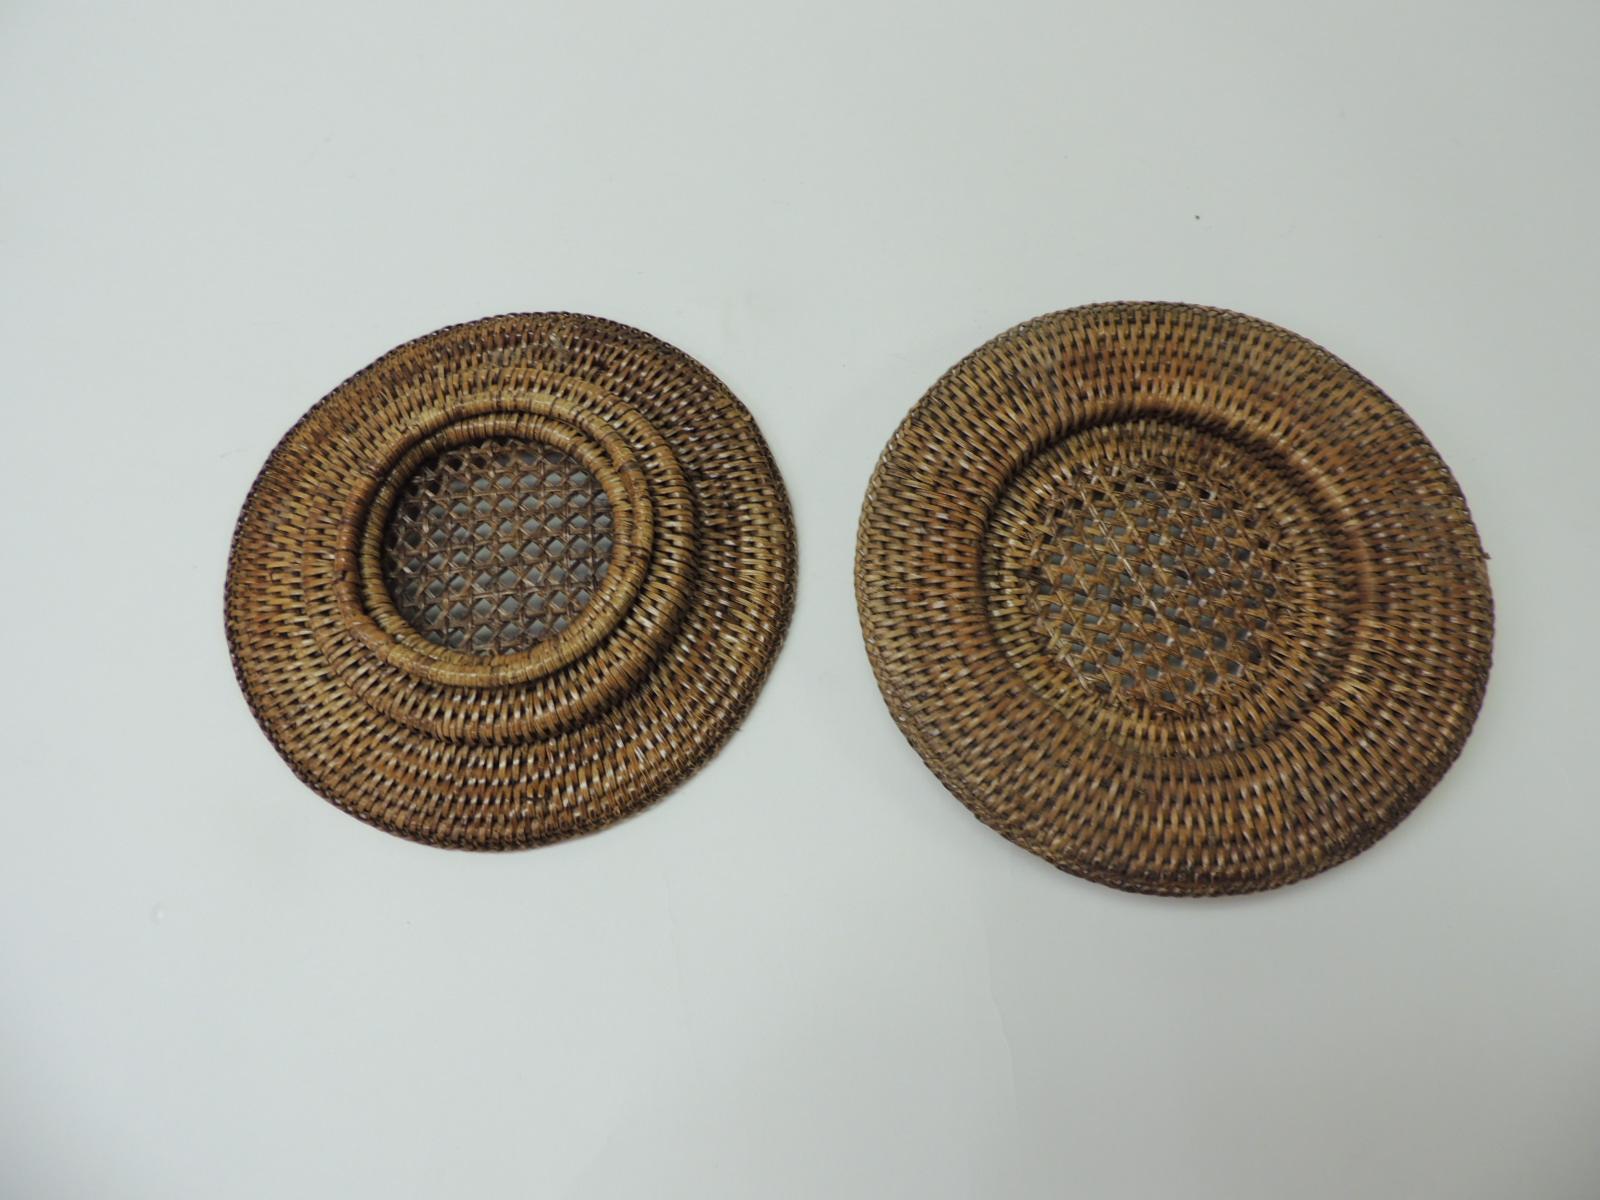 Pair of vintage round rattan woven wine bottle coasters.
Size: 8D x 1H.